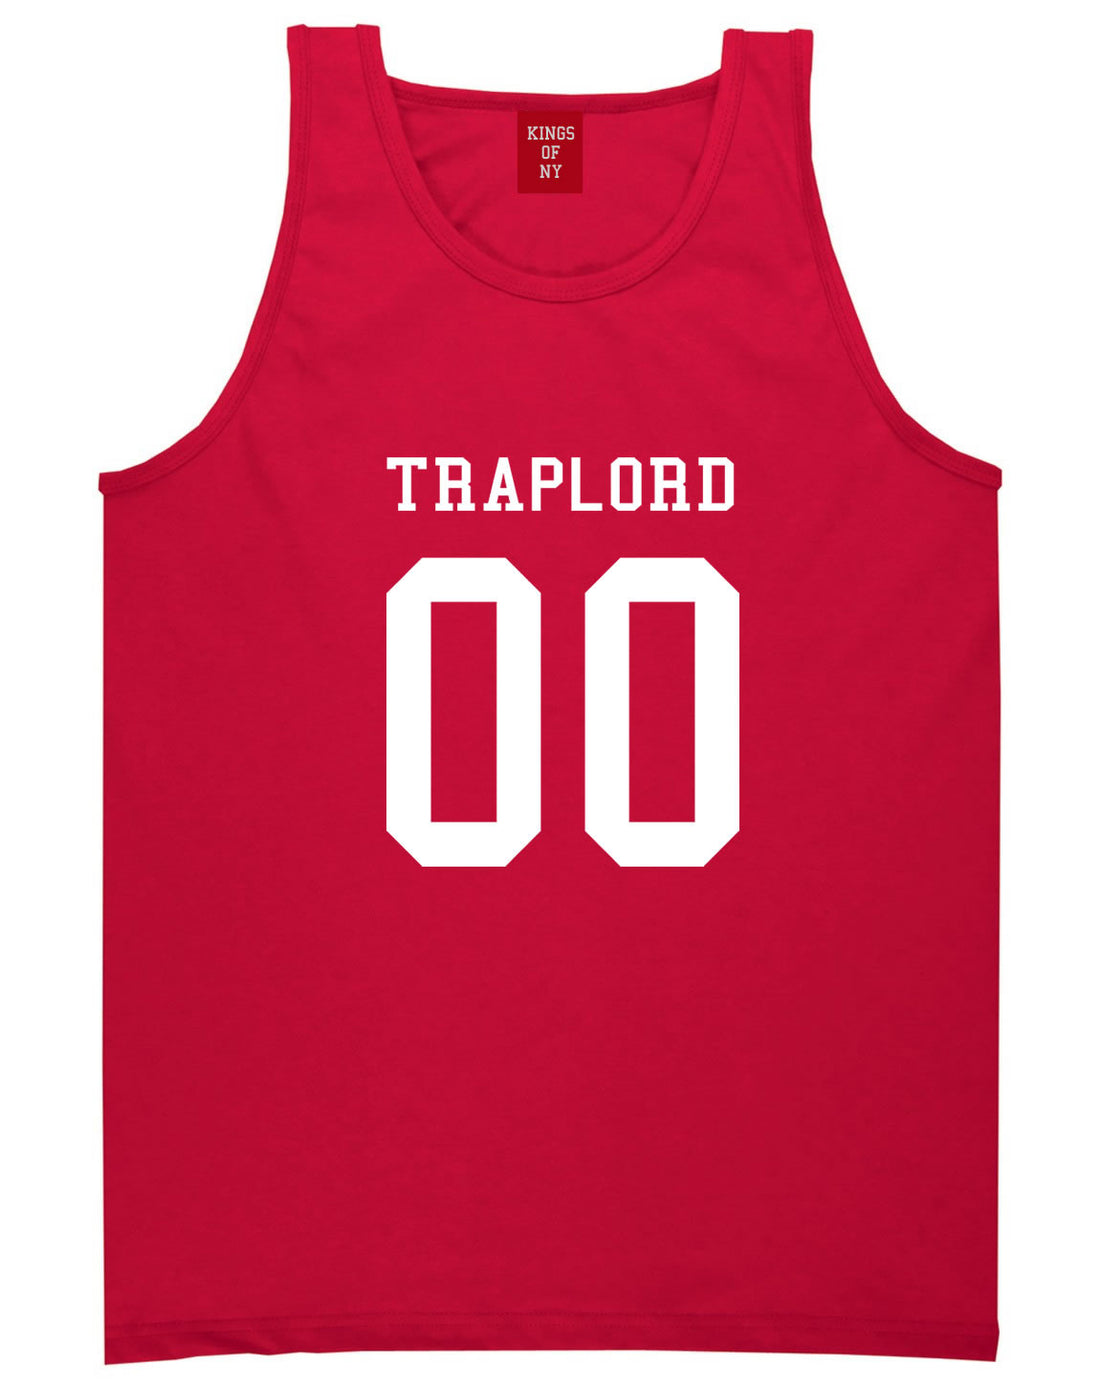 Traplord Team Jersey 00 Trap Lord Tank Top in Red By Kings Of NY